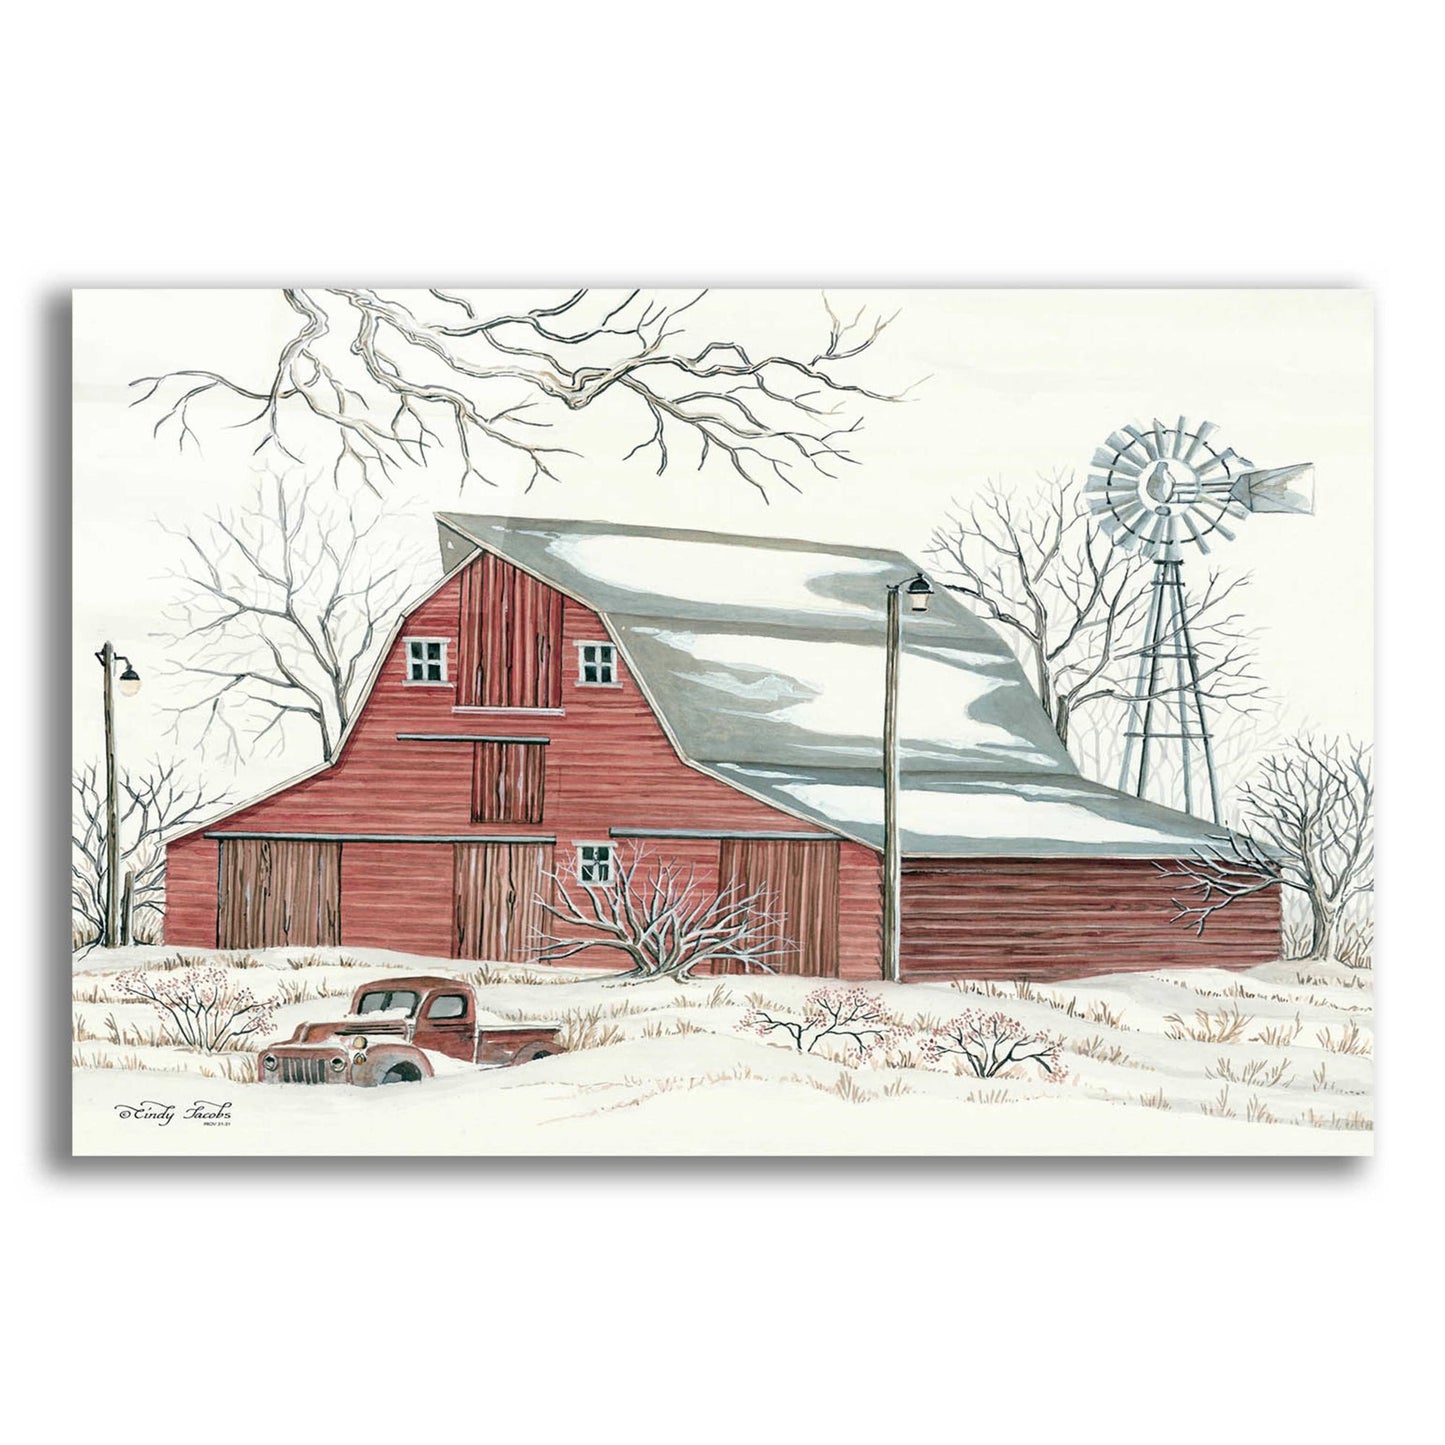 Epic Art 'Winter Barn with Pickup Truck' by Cindy Jacobs, Acrylic Glass Wall Art,24x16